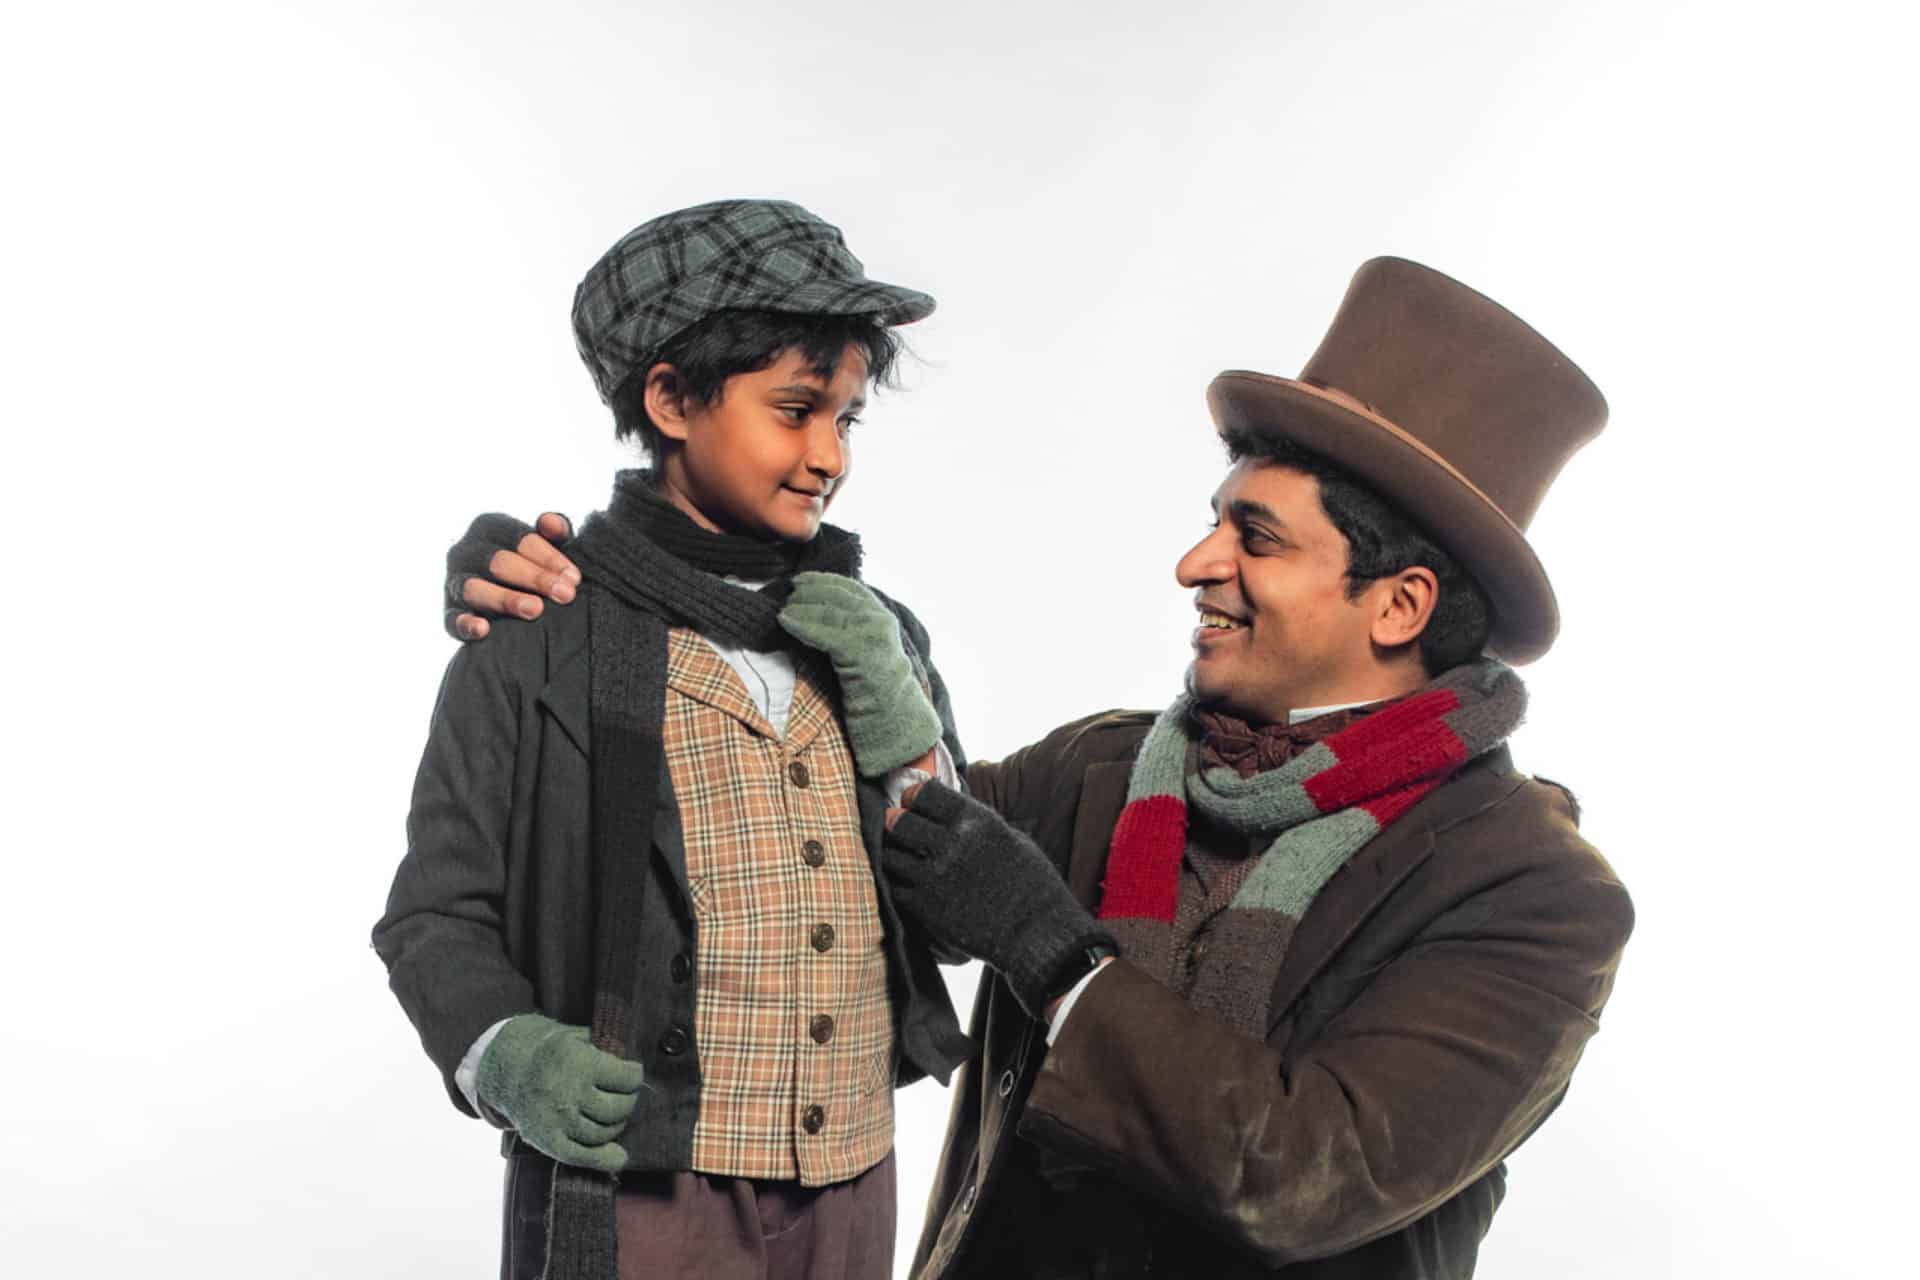 Sri and Sriram pose together for a picture in costume as their characters. Both of the actors are wearing wintery clothing with scarfs and mittens. Sriram is wearing a tophat.